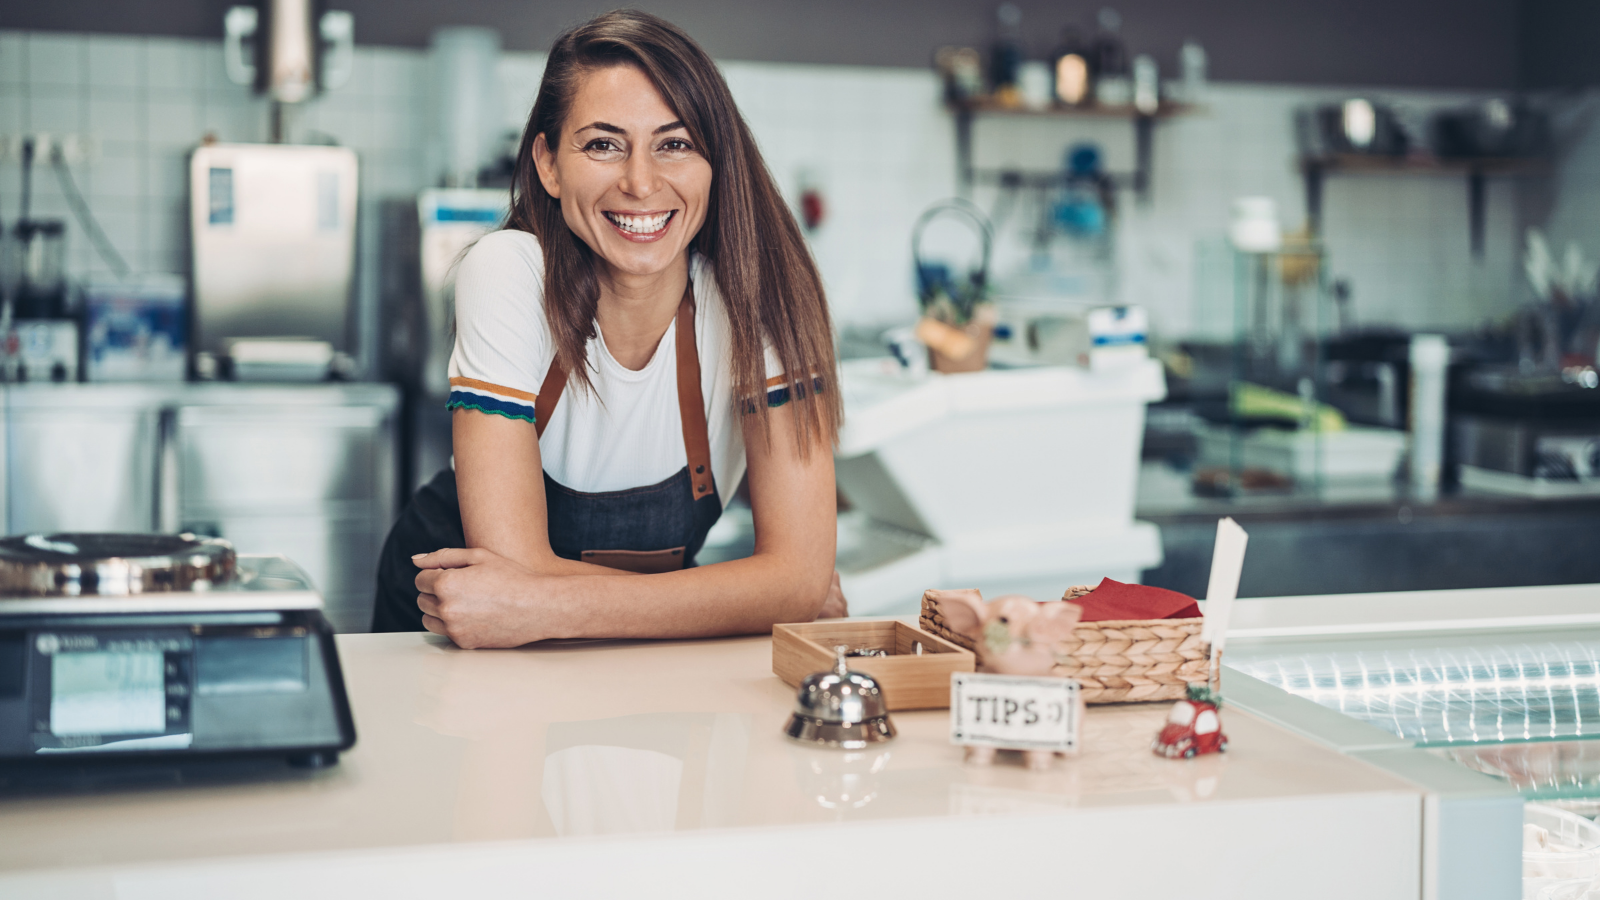 A small business owner sitting at a counter with a wide smile.